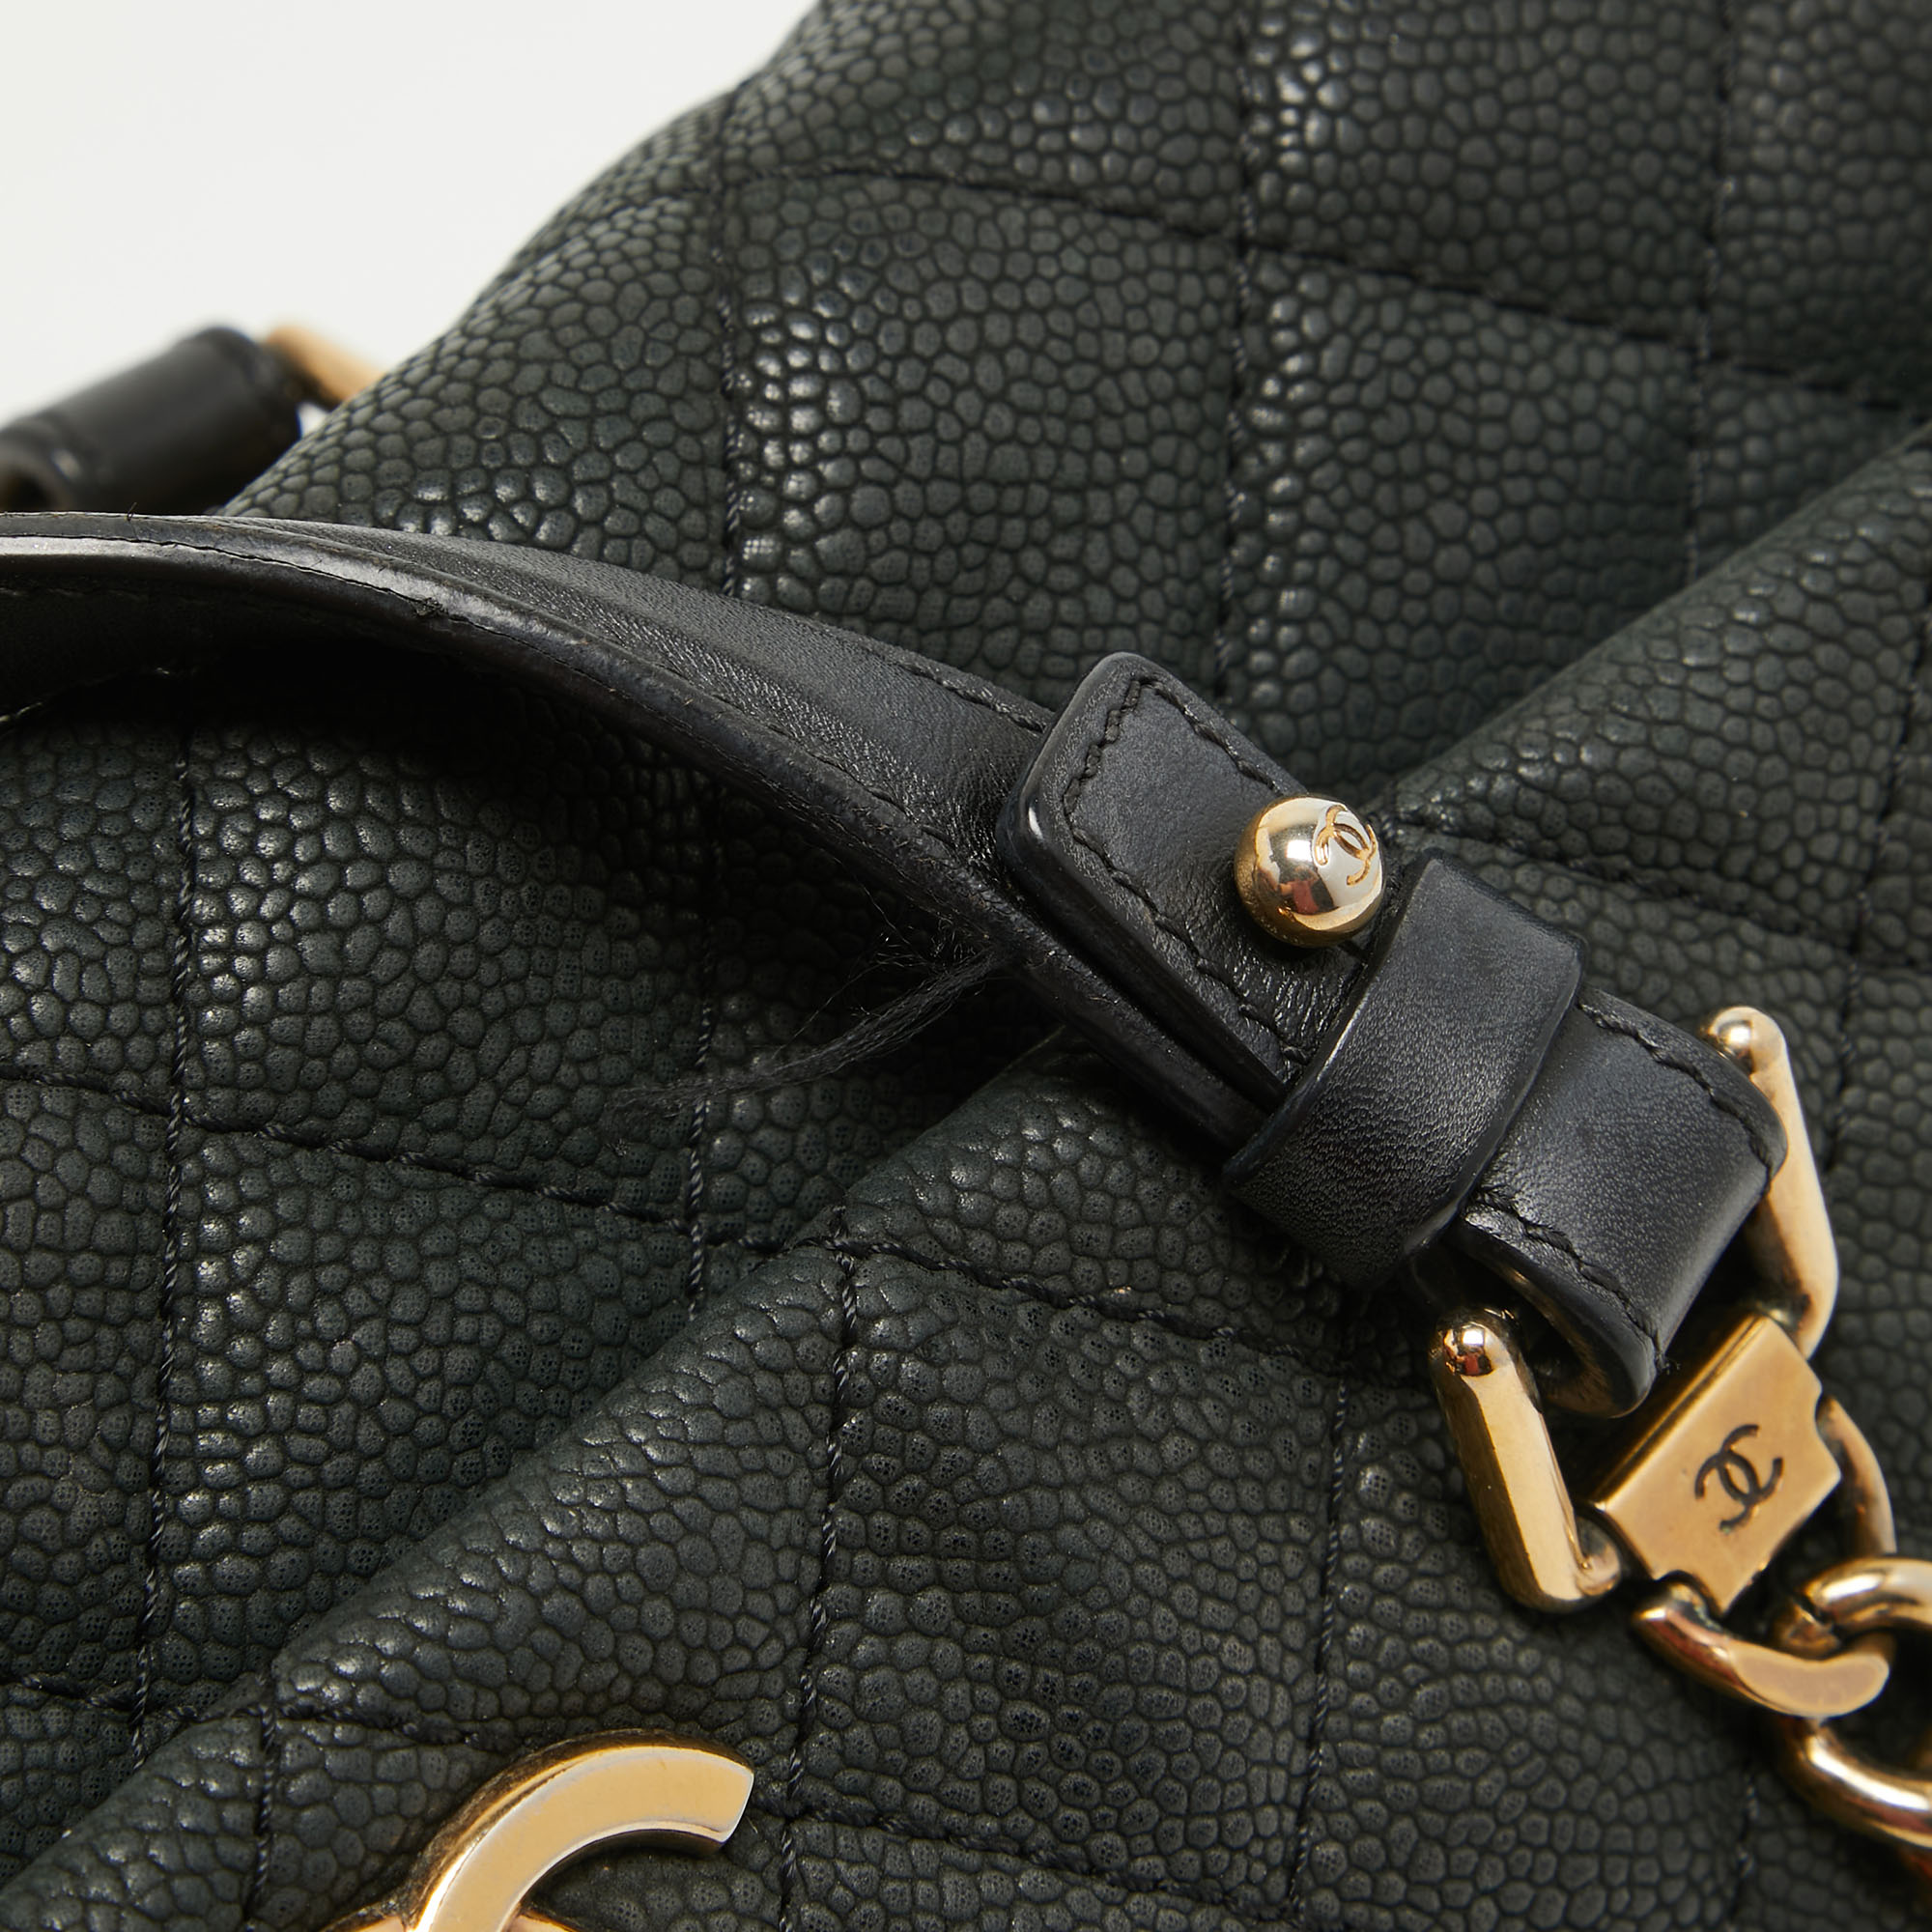 Chanel Black Caviar Leather Chic Quilt Tote